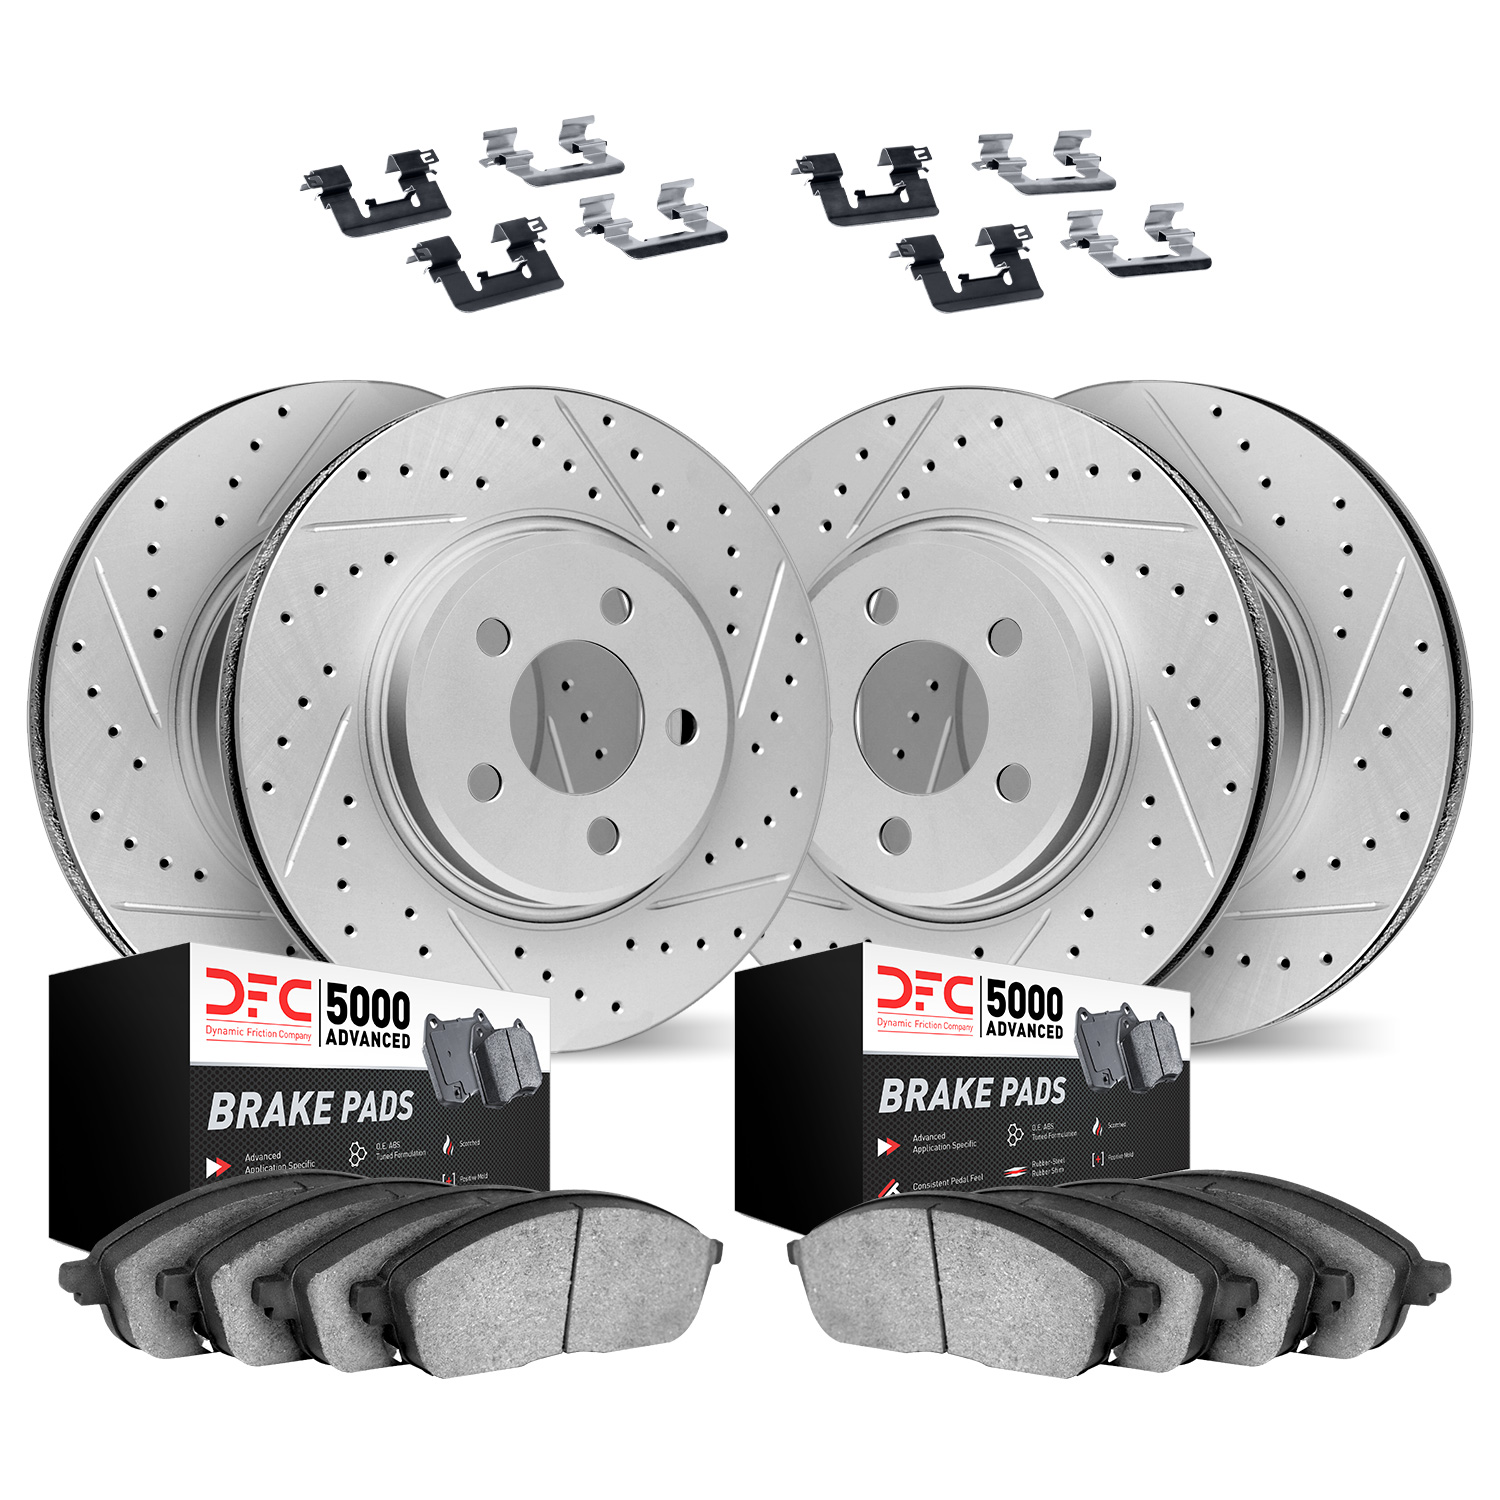 2514-40088 Geoperformance Drilled/Slotted Rotors w/5000 Advanced Brake Pads Kit & Hardware, 2006-2006 Mopar, Position: Front and